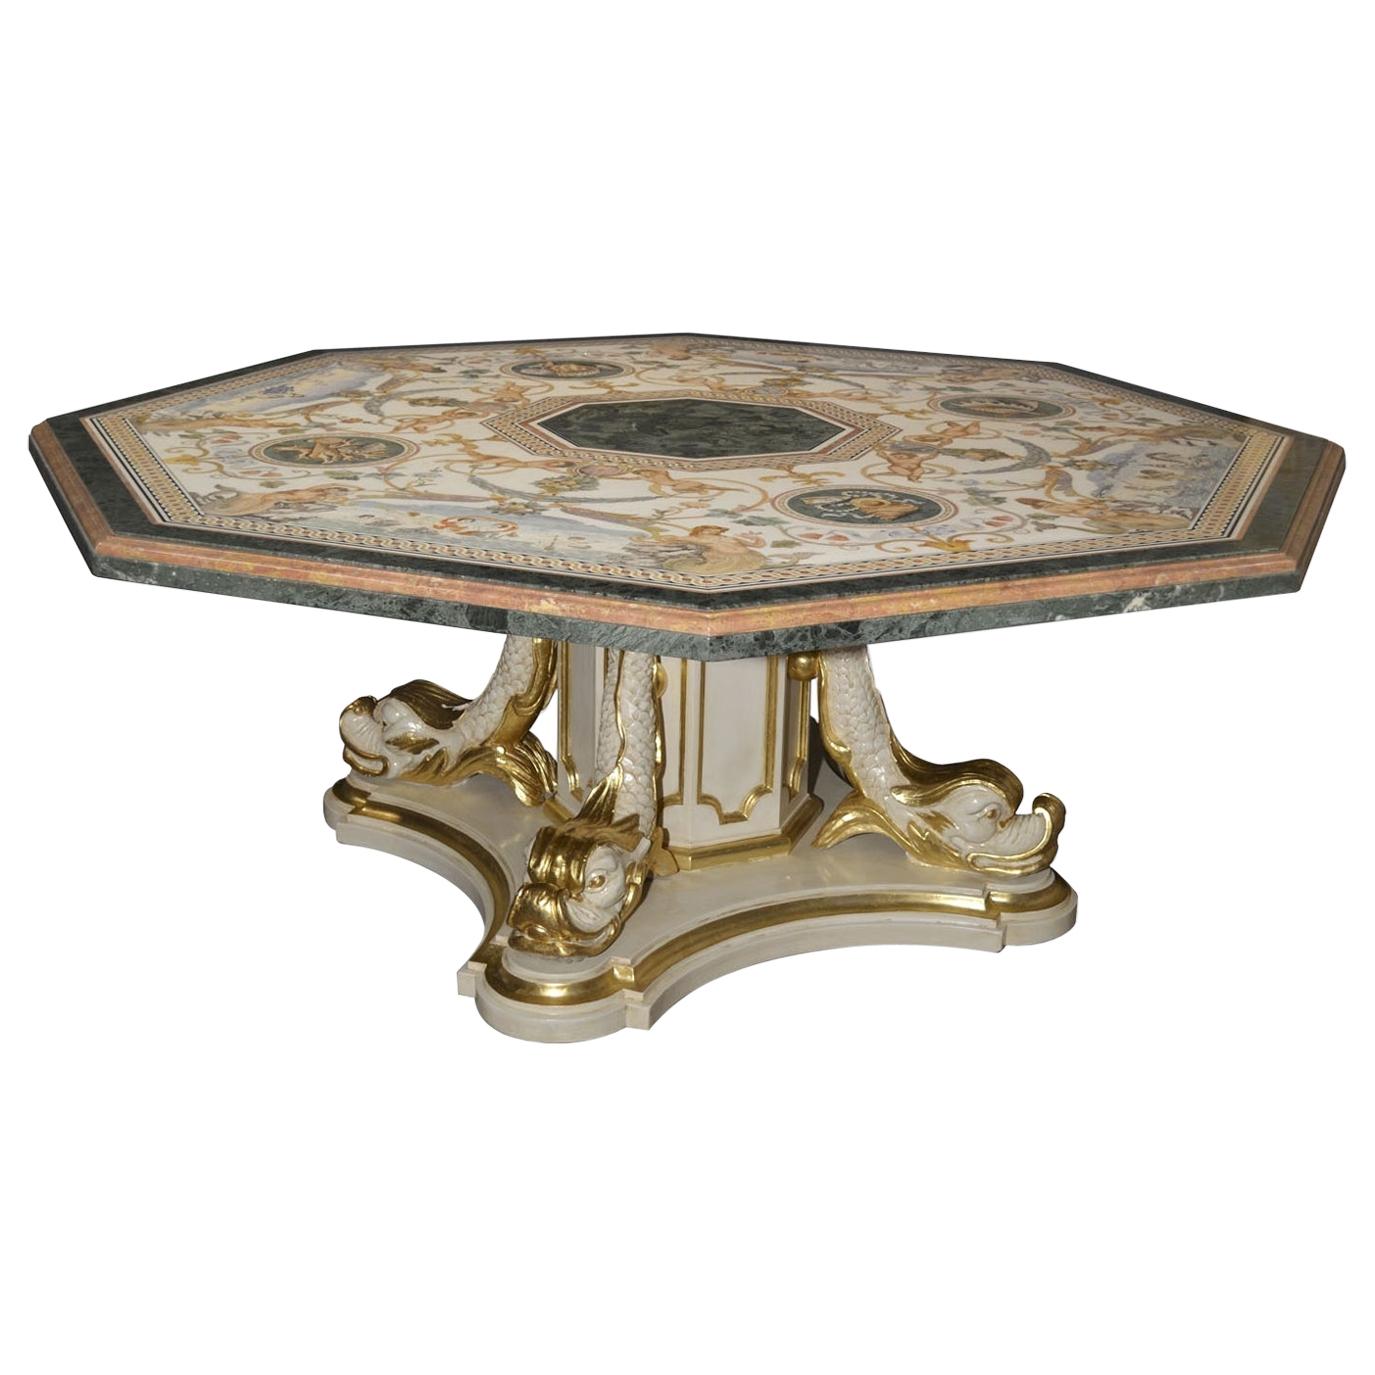 Big marble table inlaid top carved wood base handmade in Italy by Cupioli  For Sale